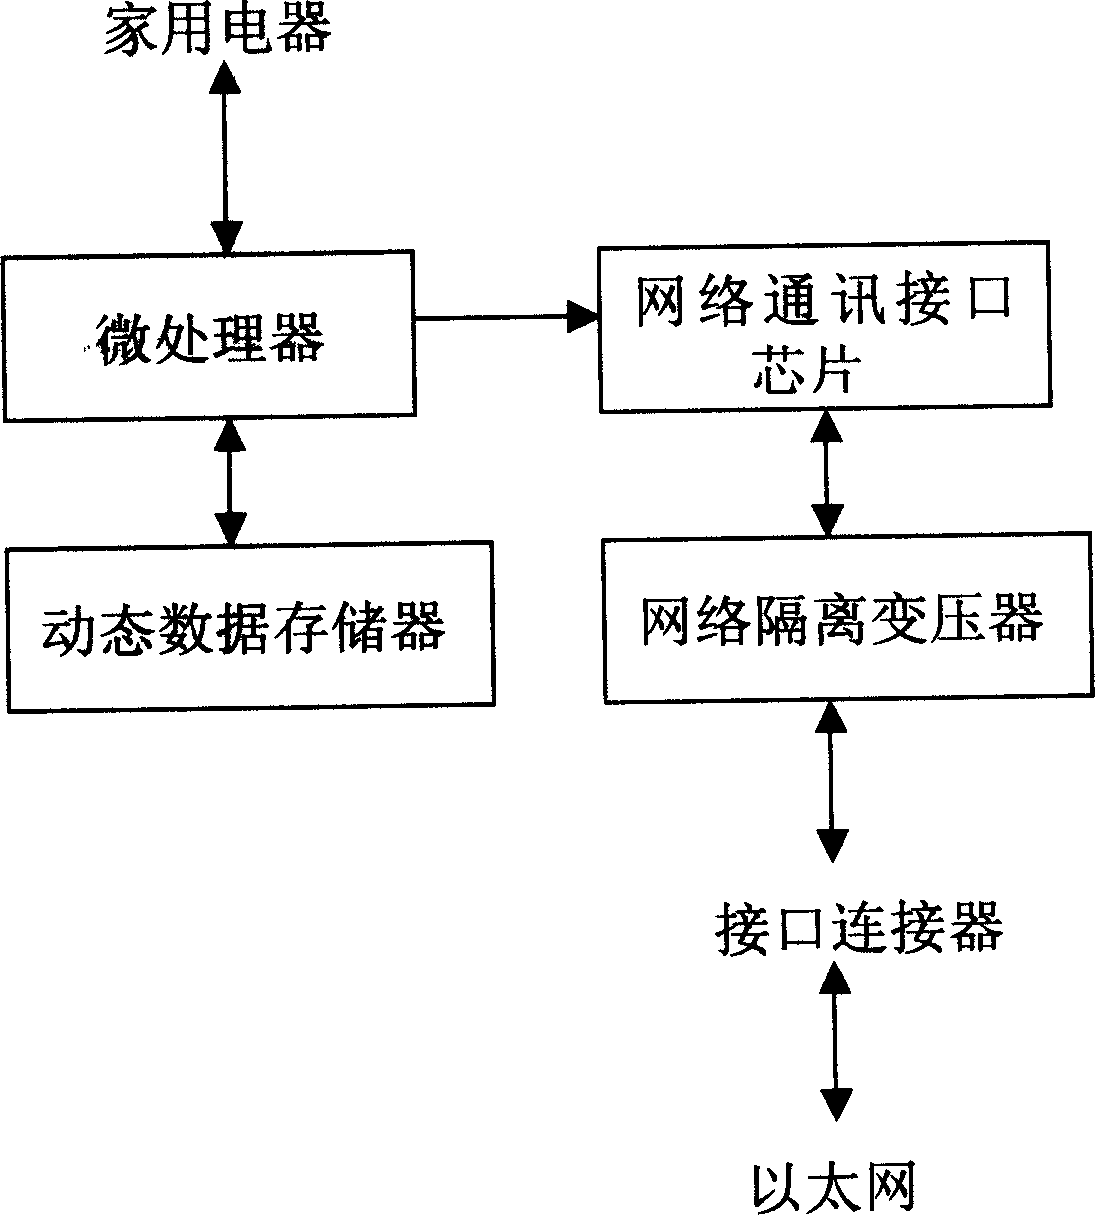 Distance network operation control method for household appliances and network household appliances